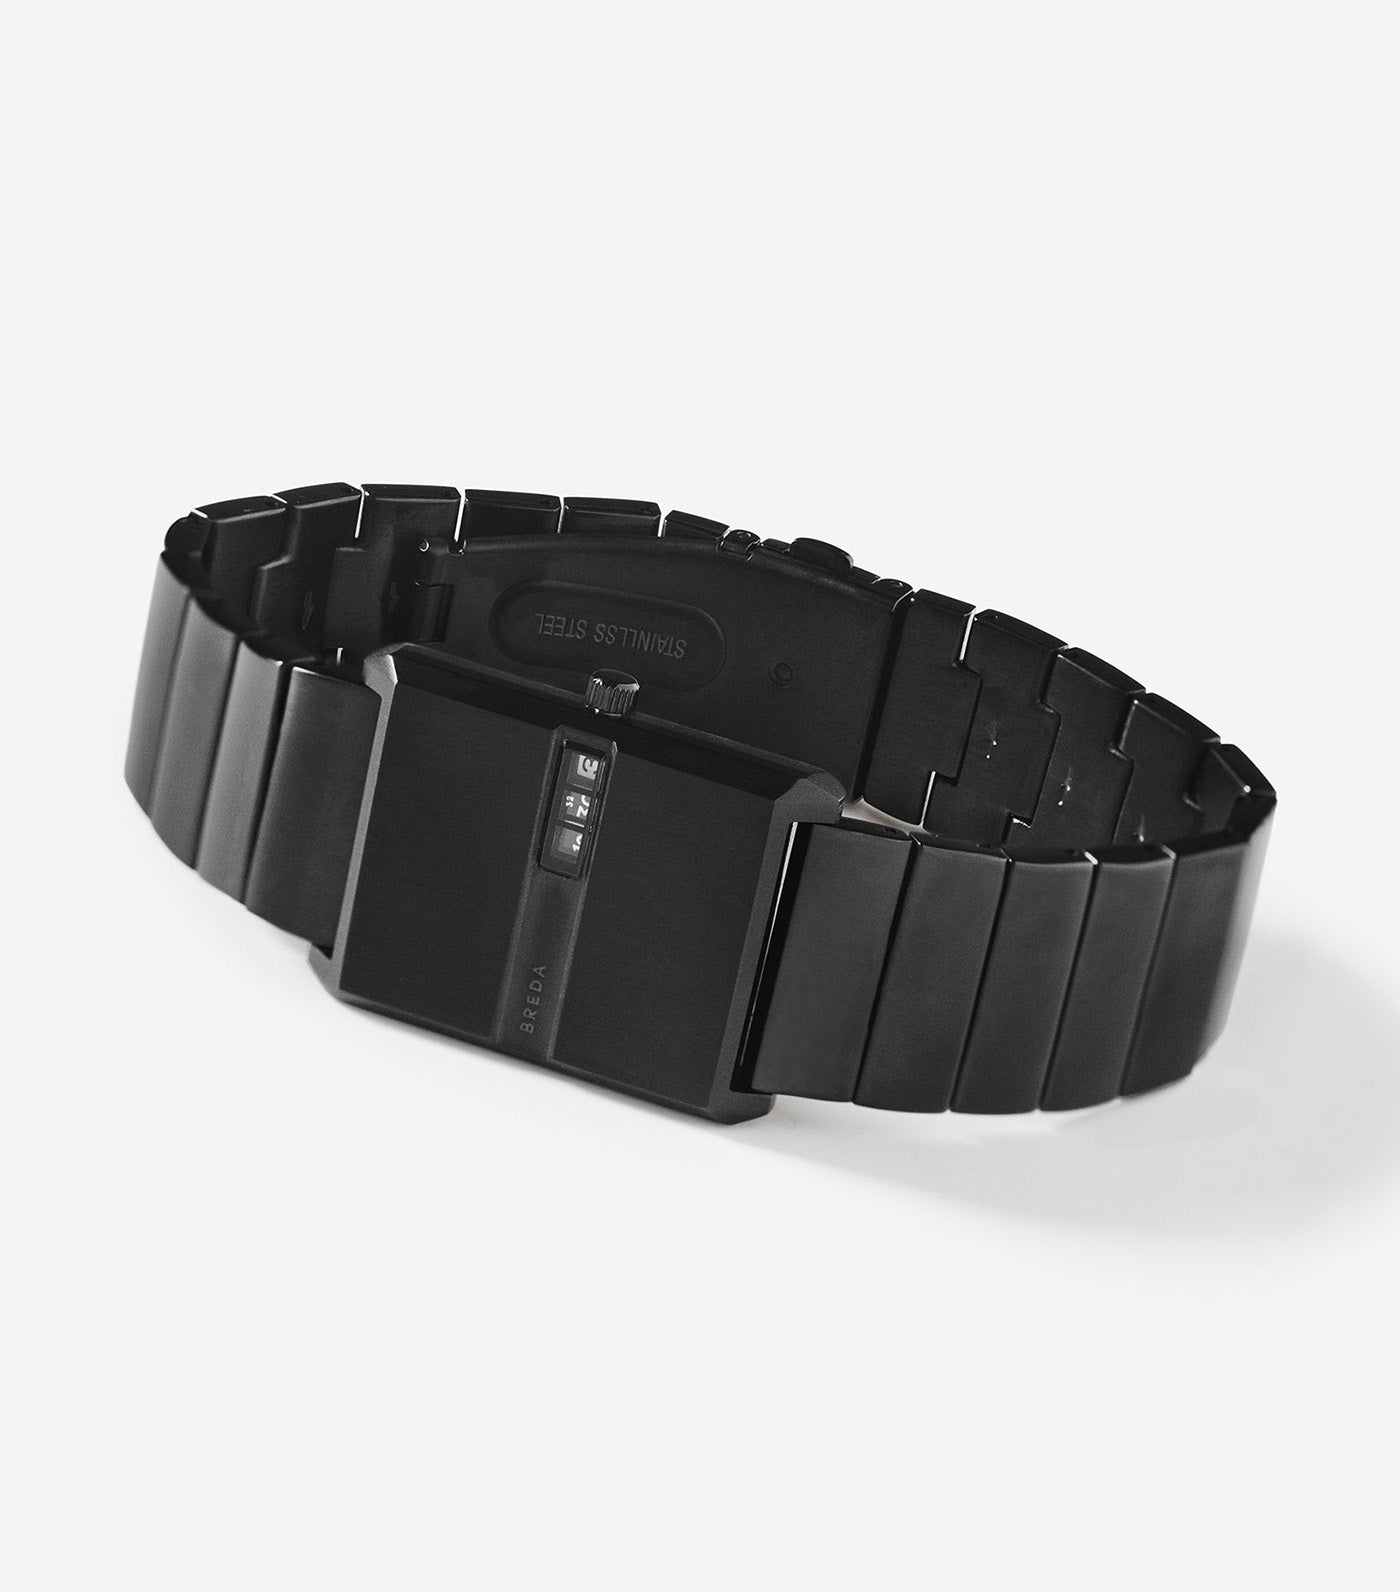 Pulse Bracelet Watch 26MM Black Plated Stainless Steel and Metal